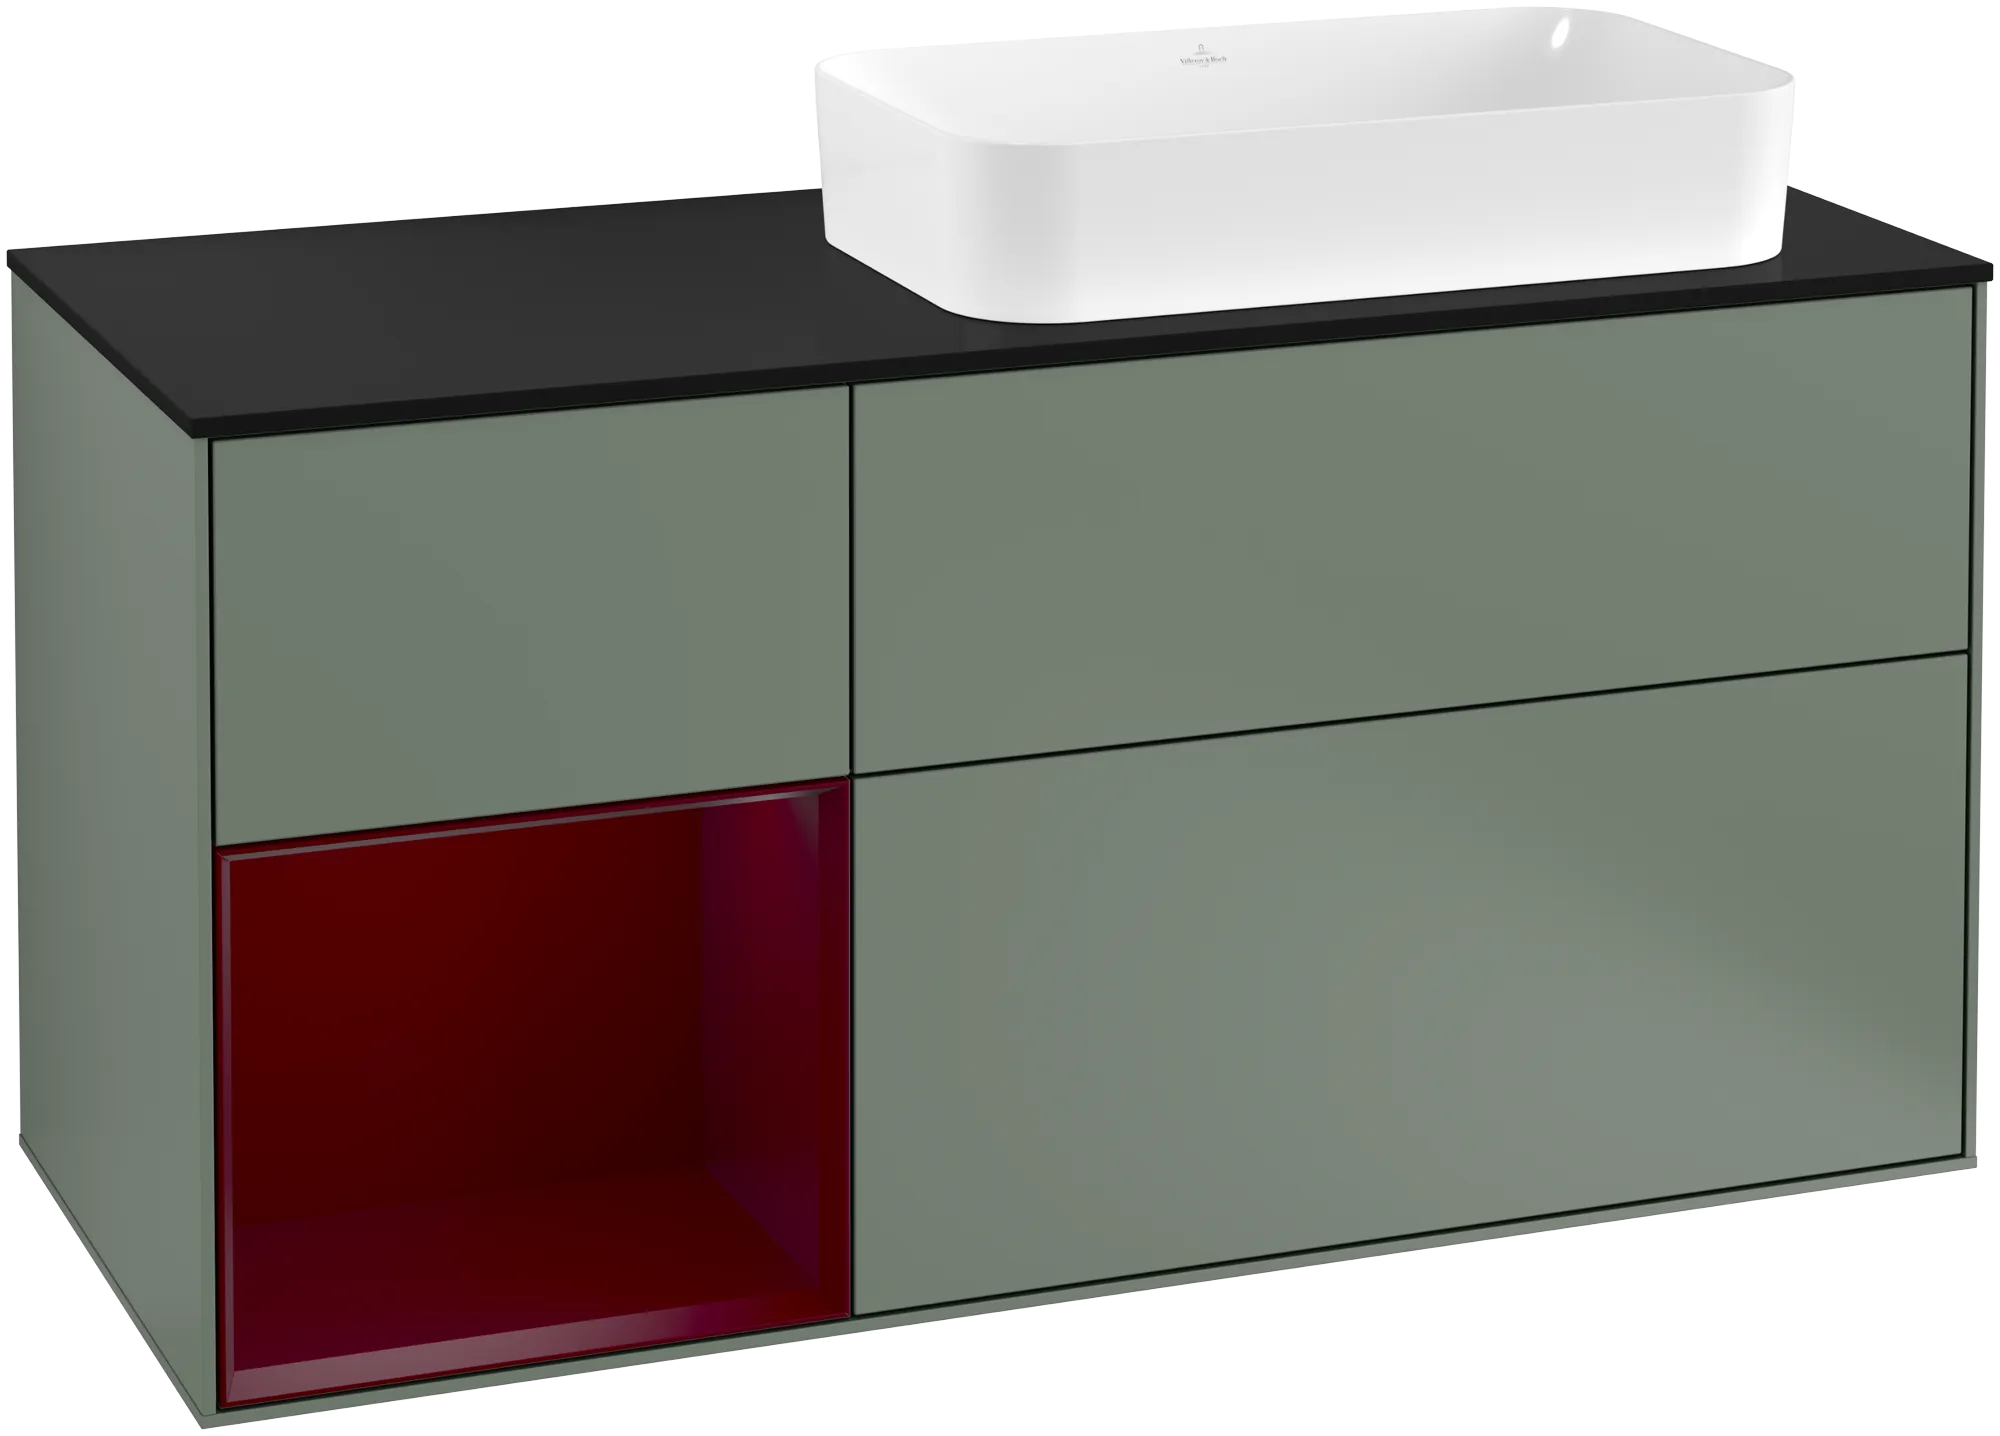 Picture of VILLEROY BOCH Finion Vanity unit, with lighting, 3 pull-out compartments, 1200 x 603 x 501 mm, Olive Matt Lacquer / Peony Matt Lacquer / Glass Black Matt #G272HBGM